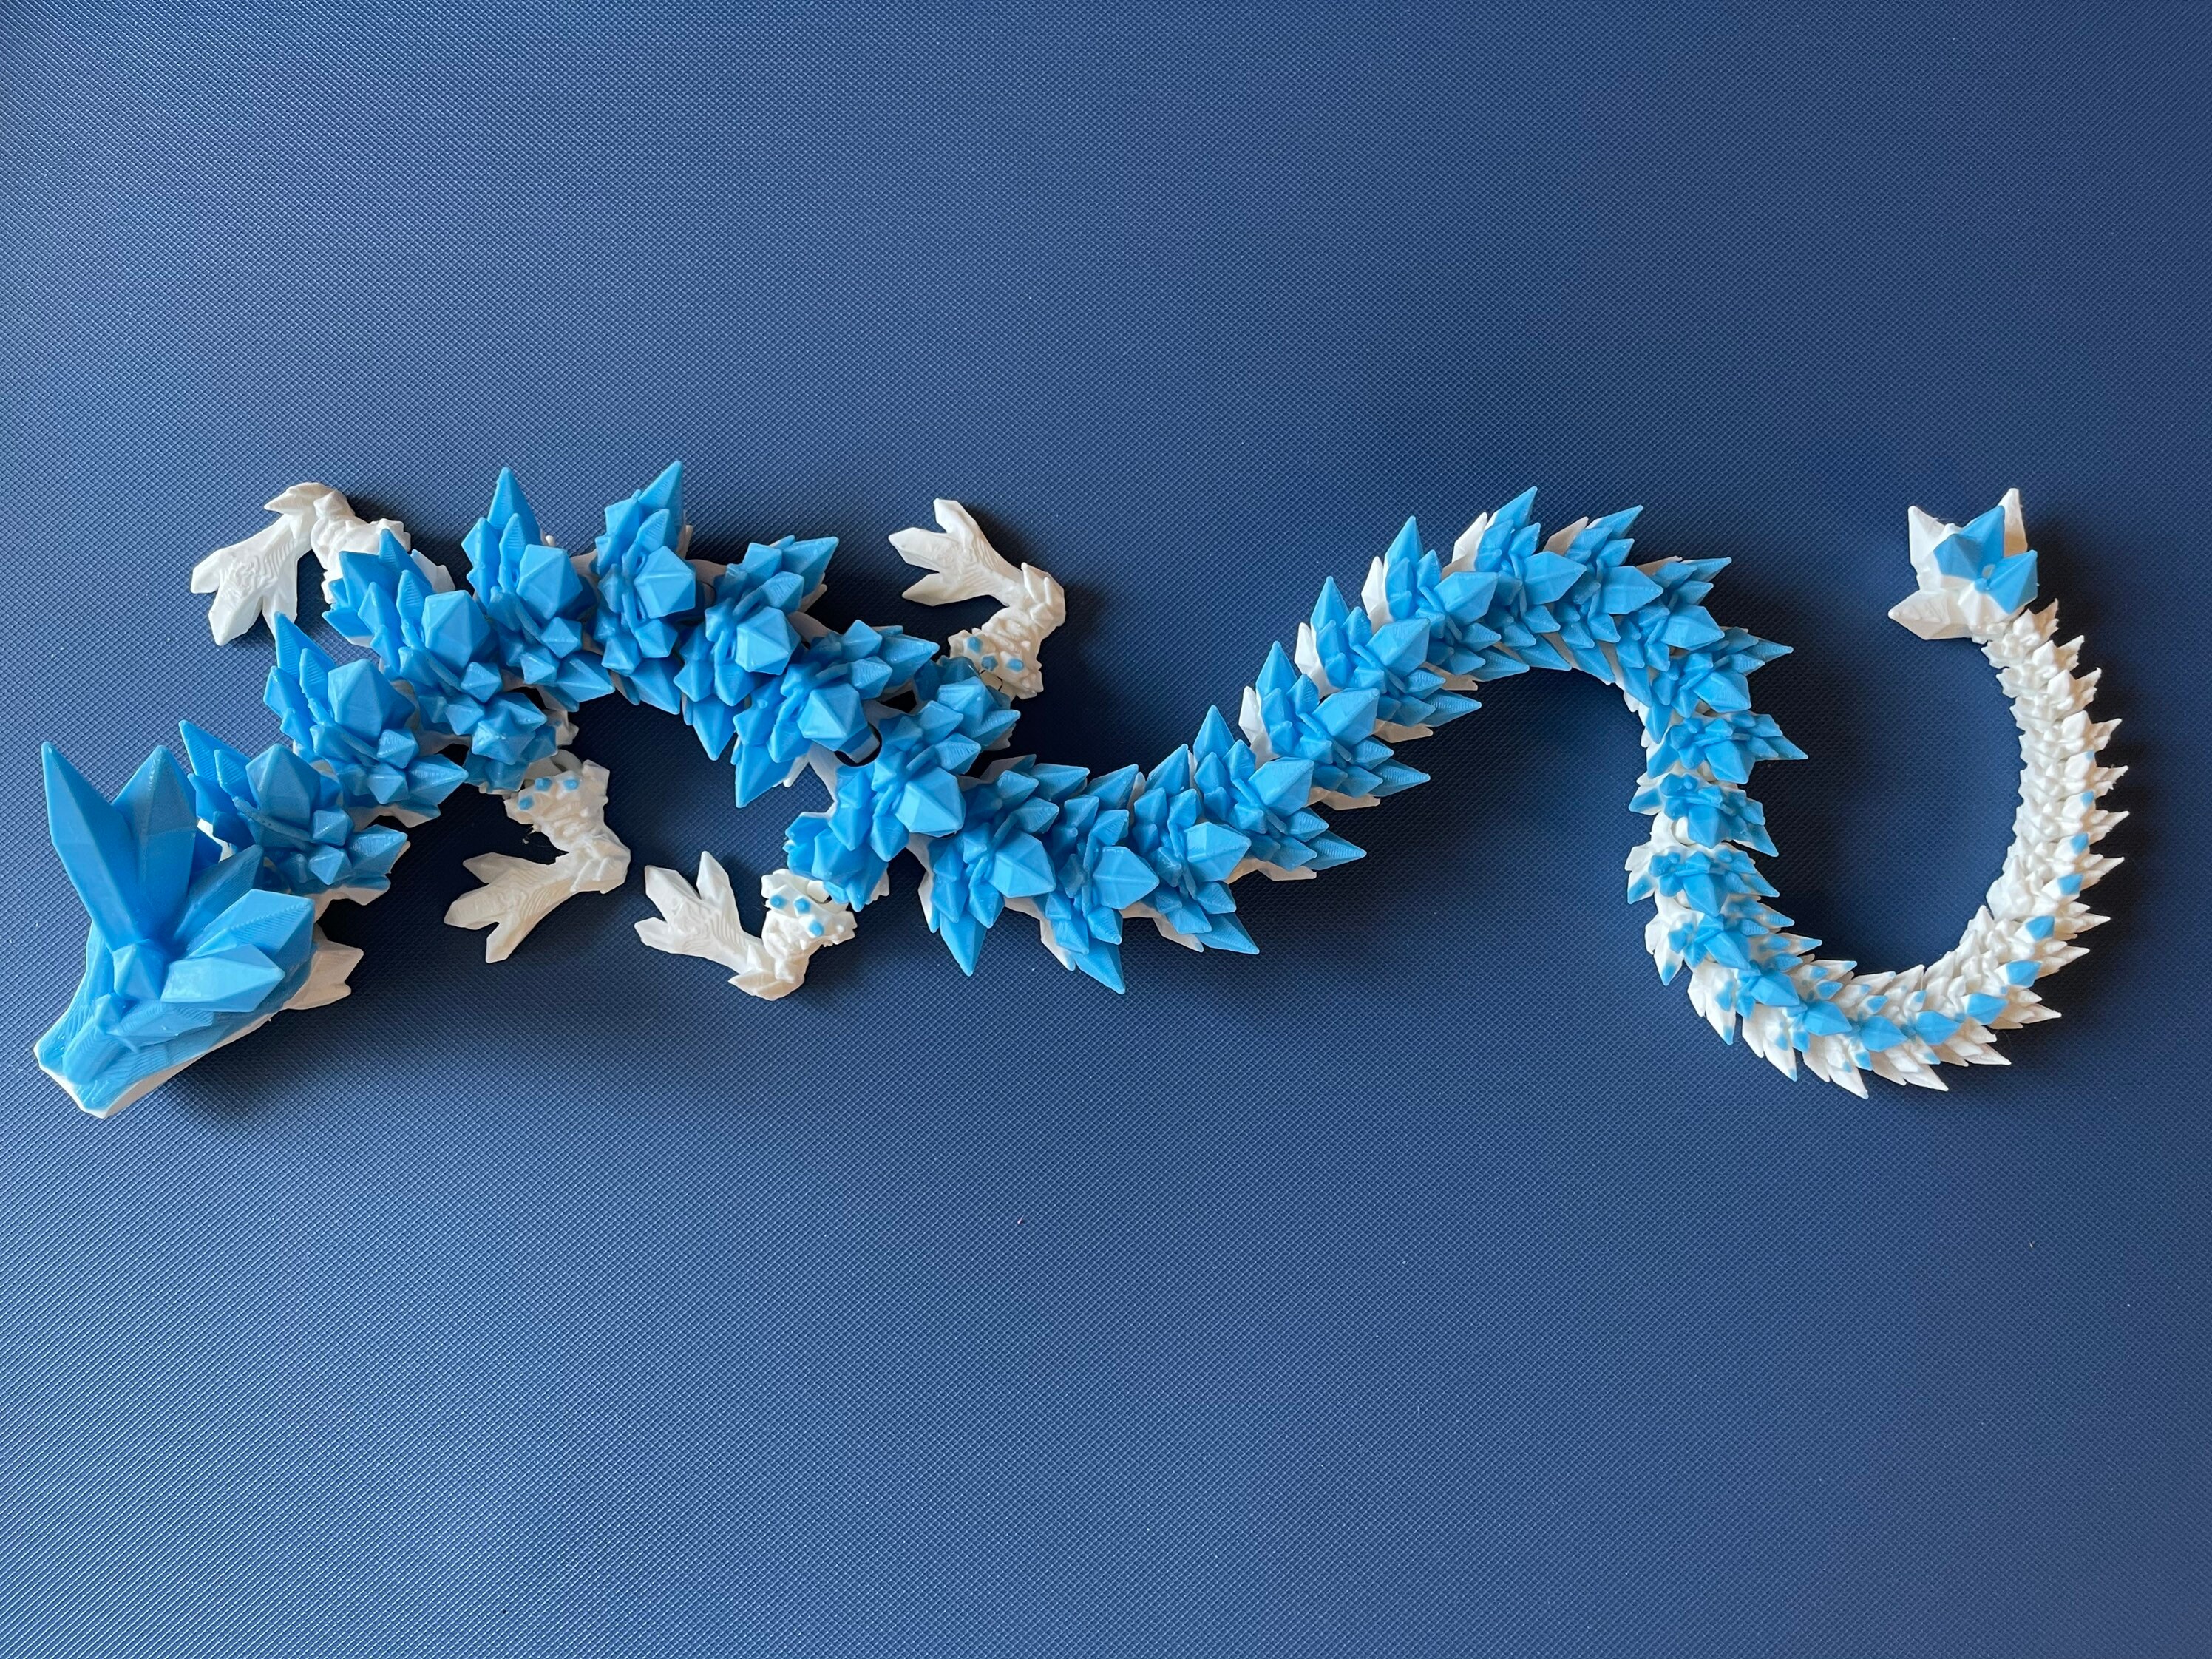 Two Color 3D Printed Dragon, Personalized Color, 24 Inch, by Cinderwing3d,  Articulated Flexi Fidget Toy 